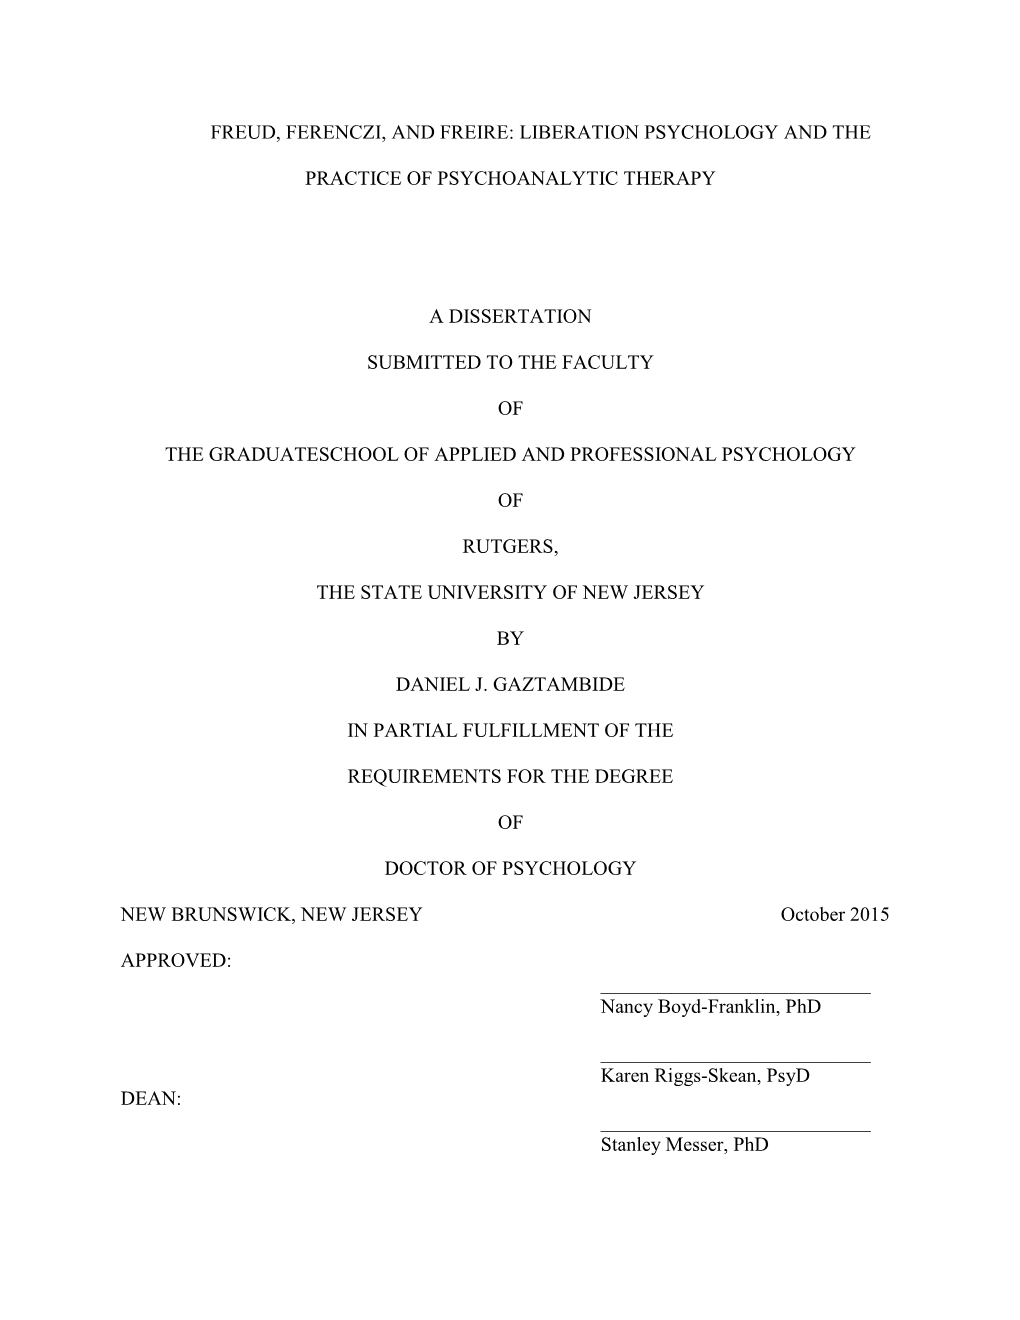 Freud, Ferenczi, and Freire: Liberation Psychology and the Practice of Psychoanalytic Therapy a Dissertation Submitted to the F